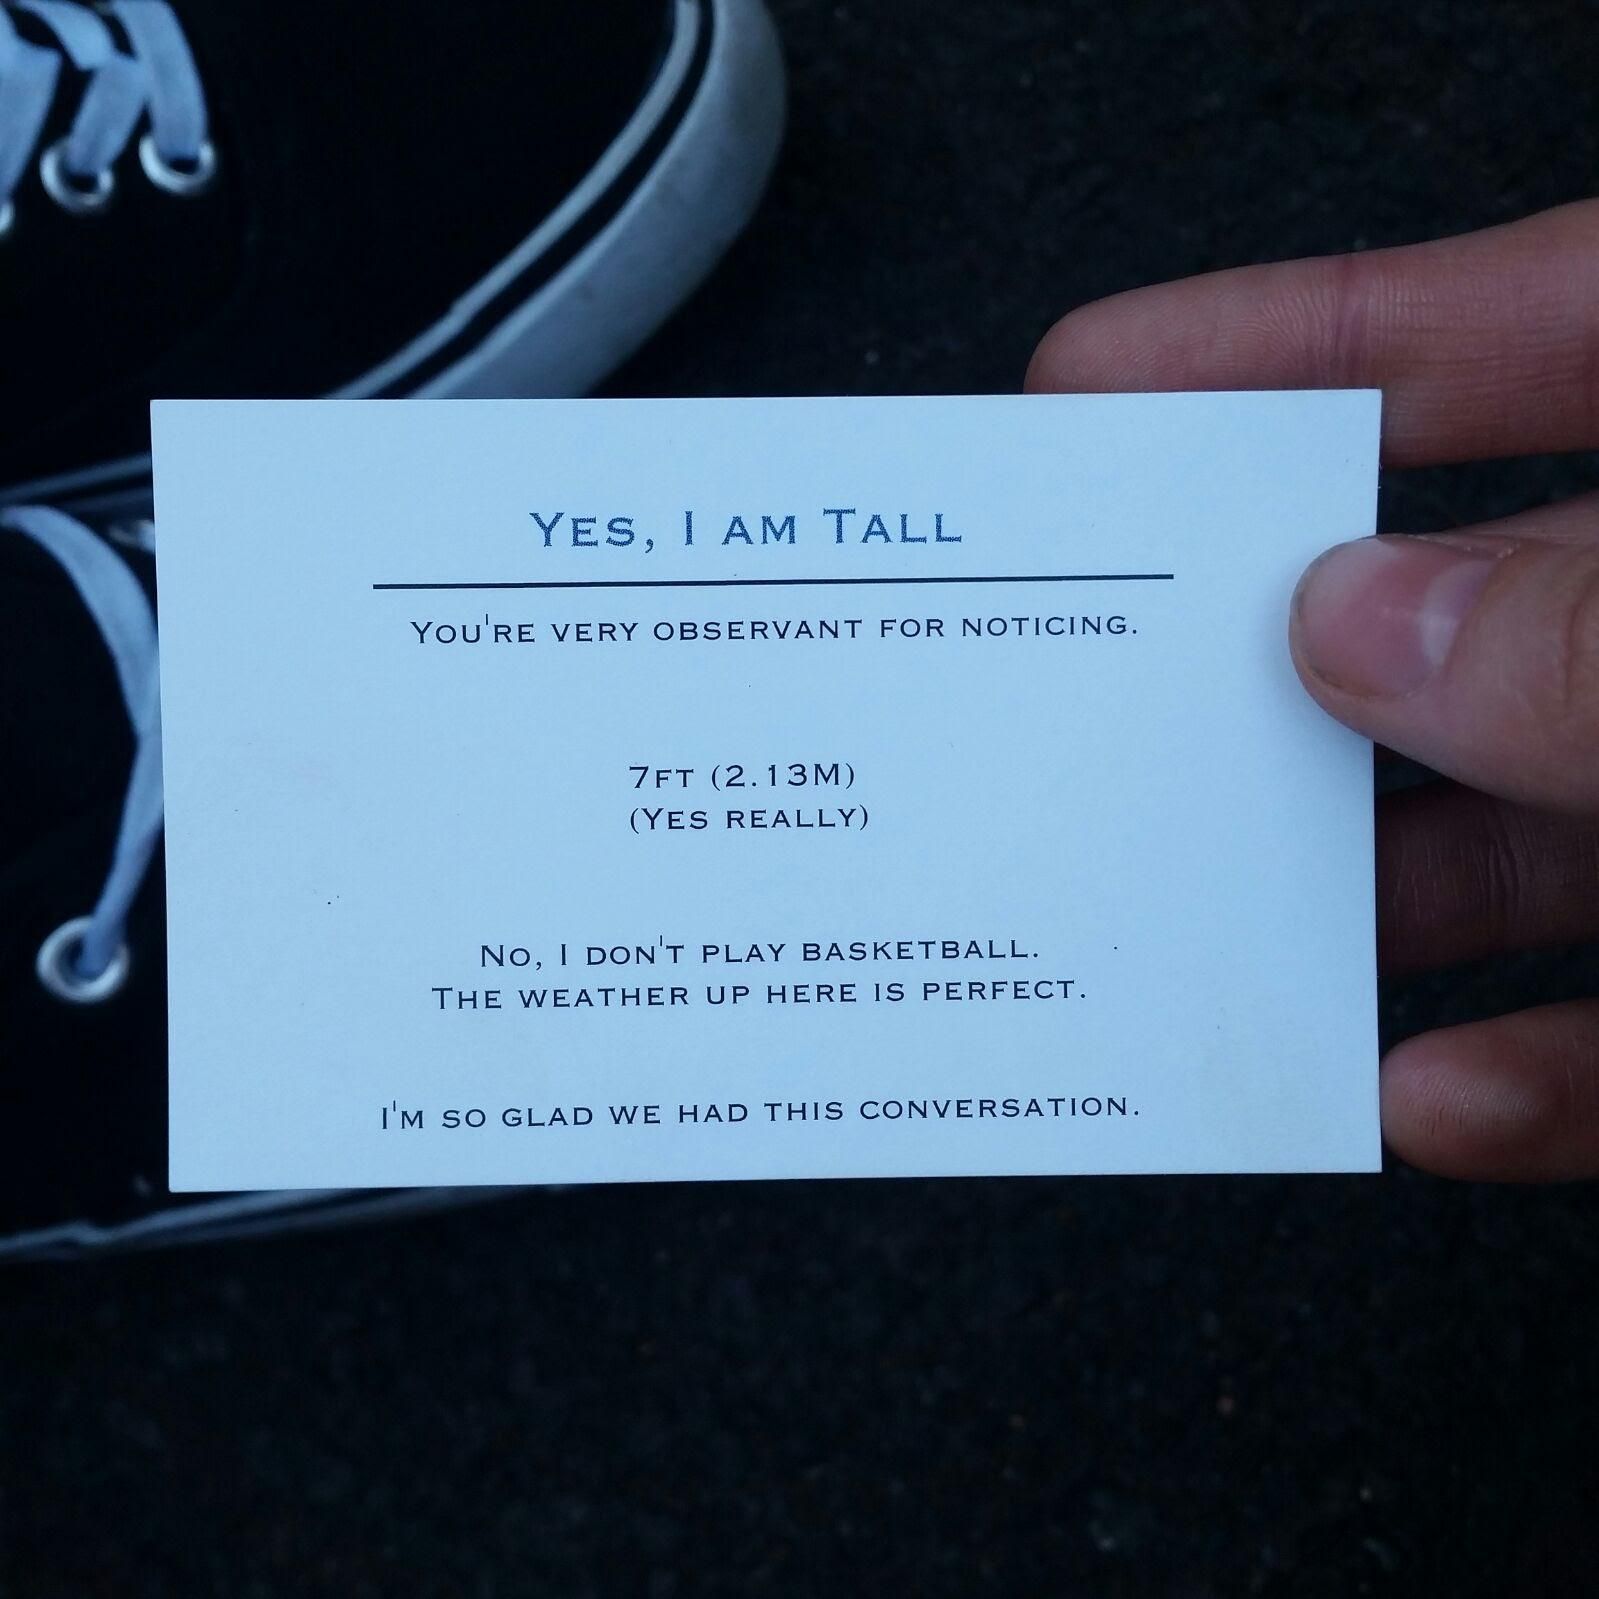 A few years ago I met a really tall guy at a rave. I ask him a question, he just handed me this card